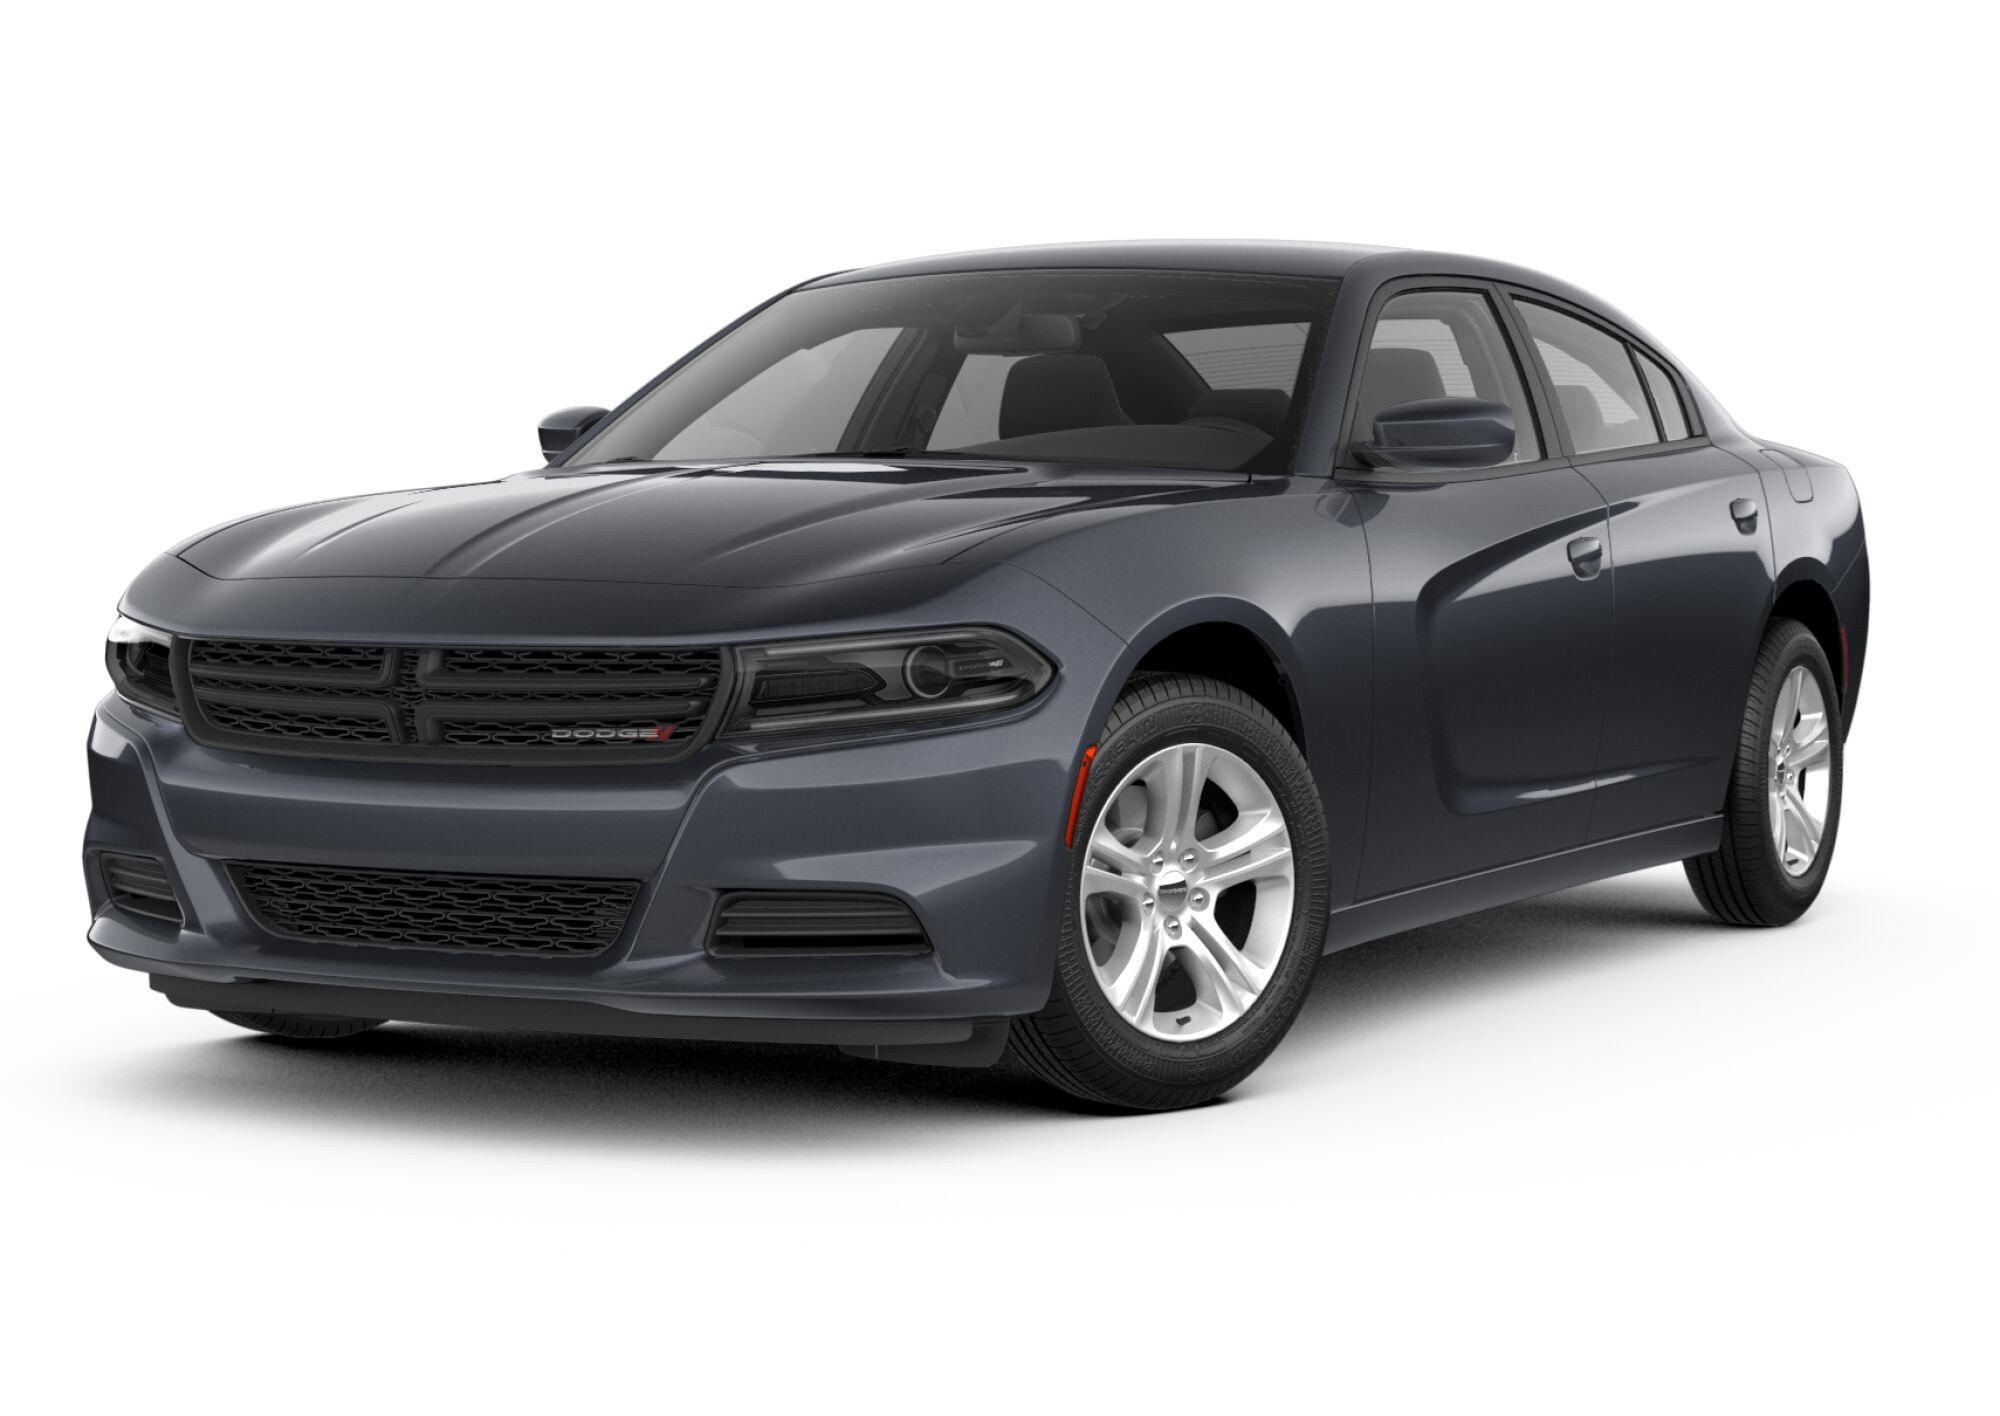 2016 Dodge Charger SXT Full Specs, Features and Price | CarBuzz